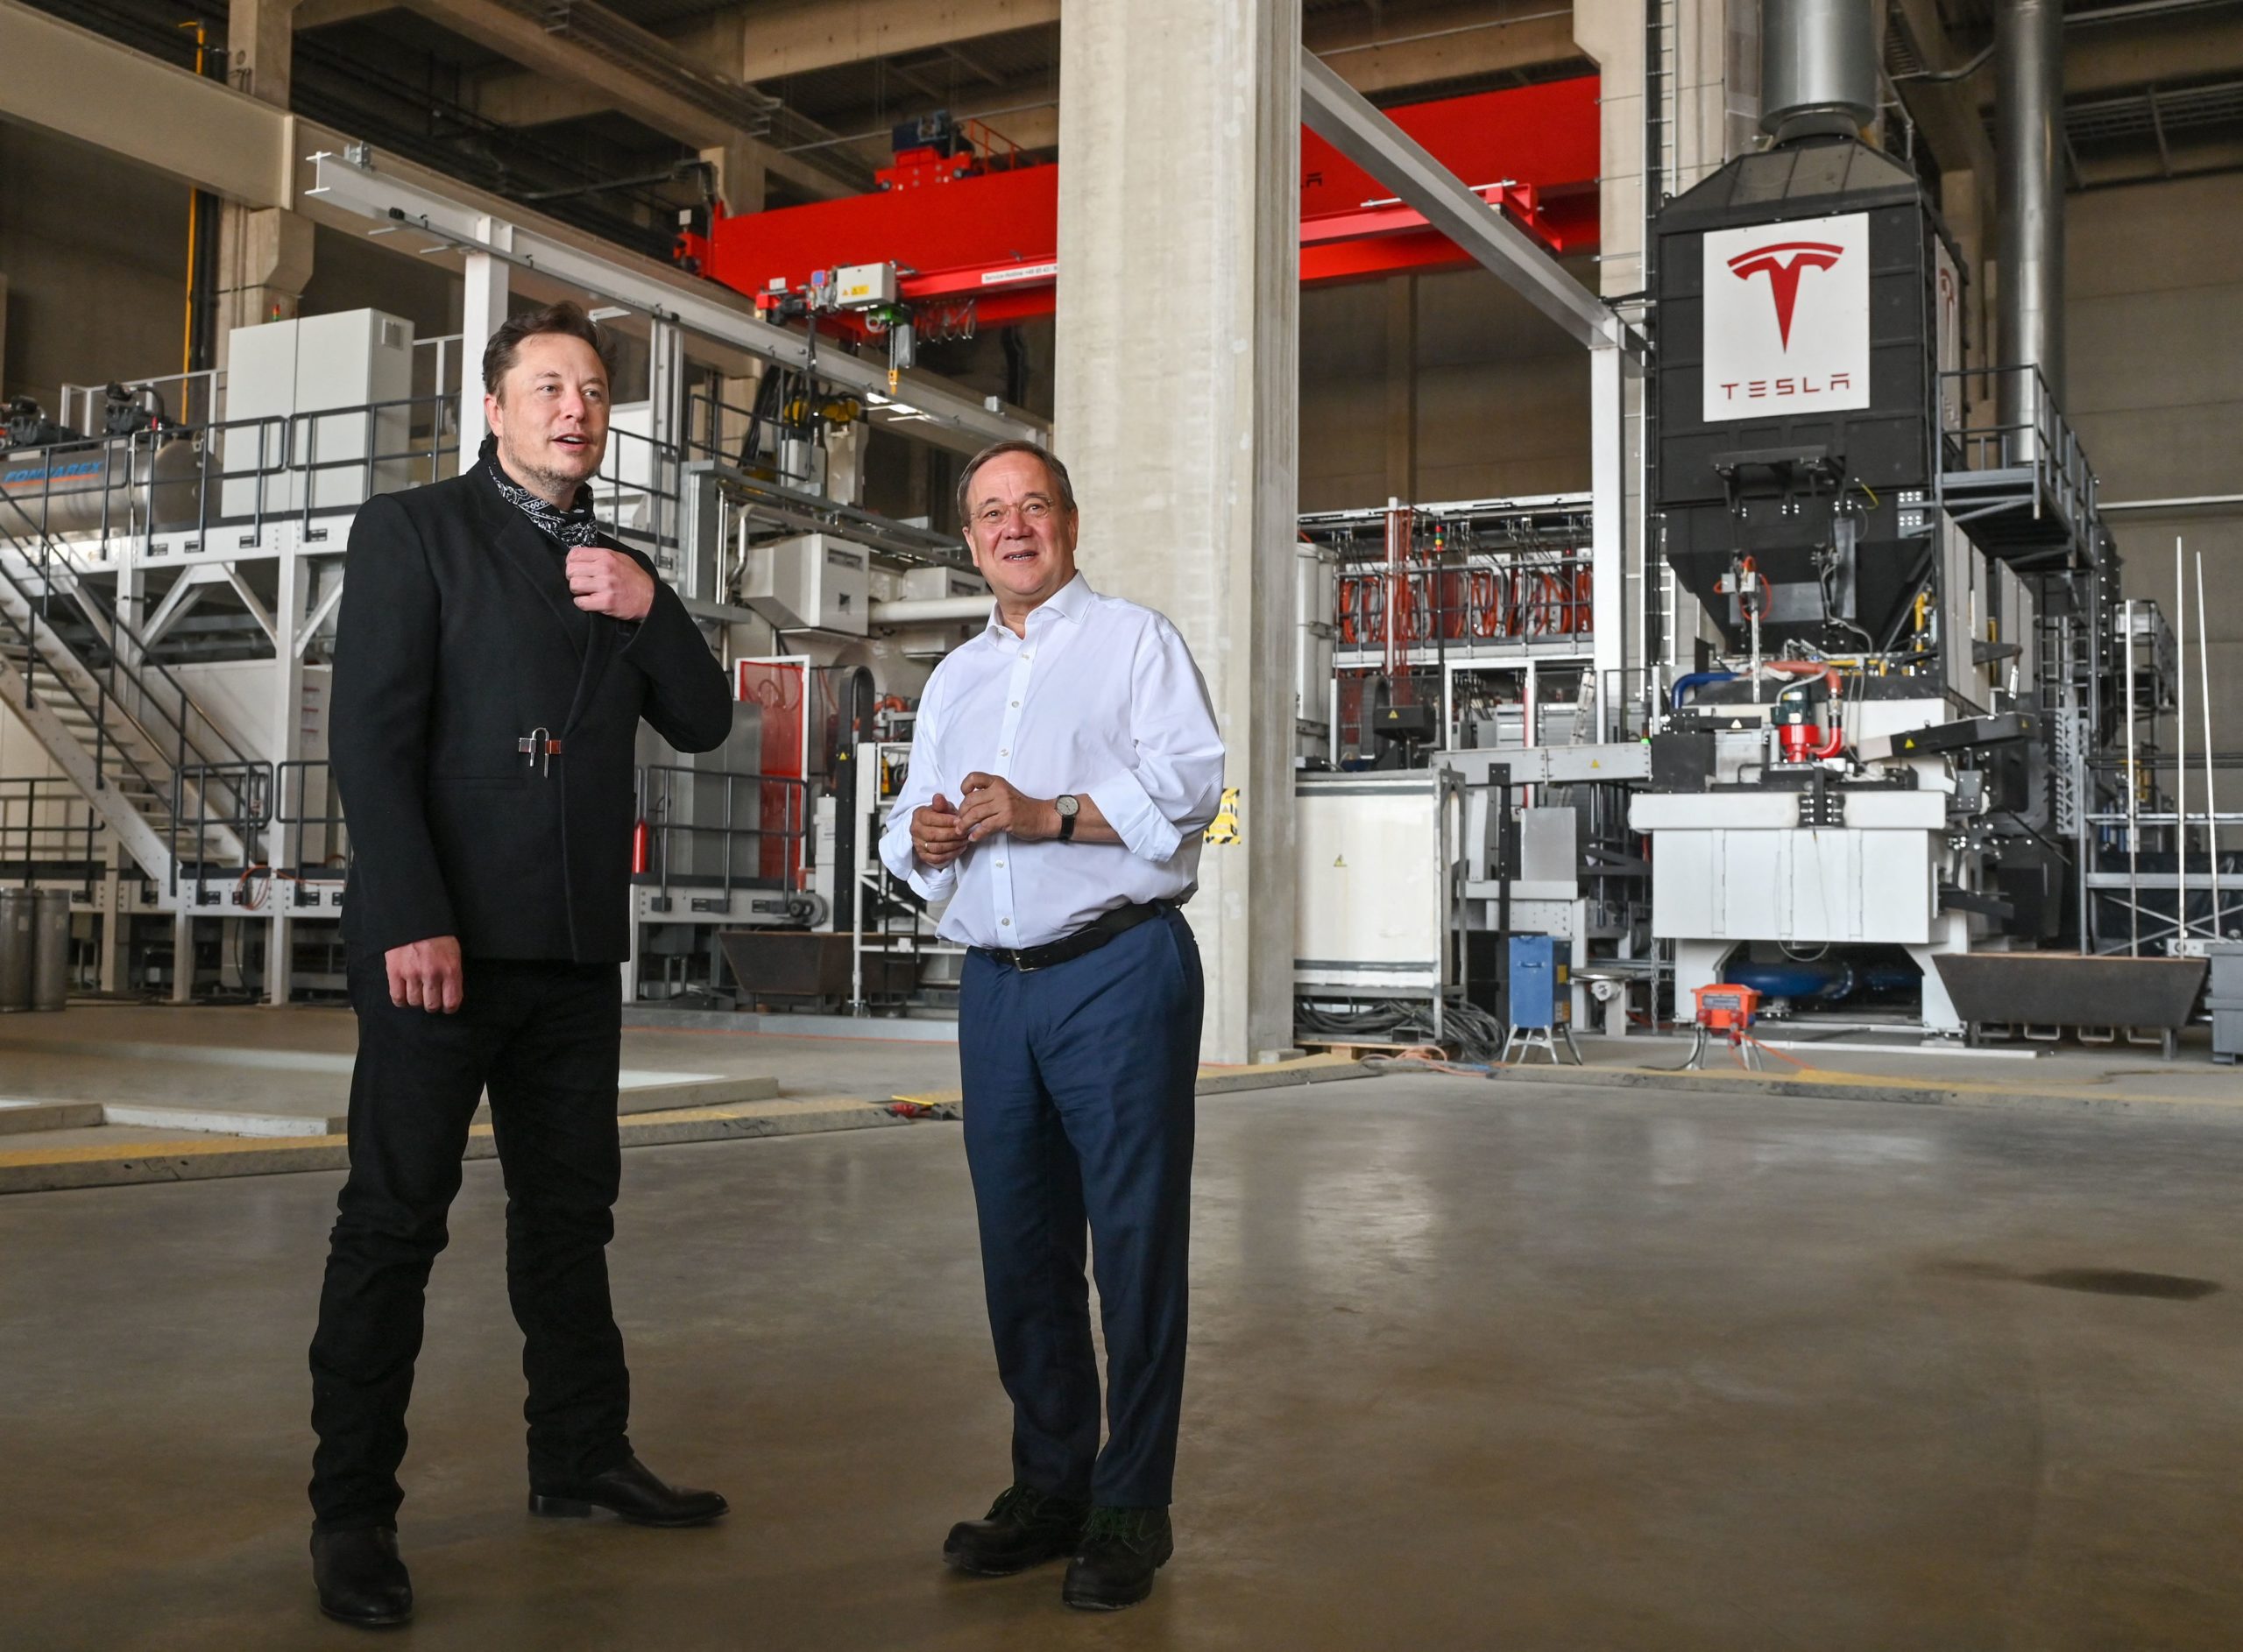 Elon Musk visits a Tesla Gigafactory plant under construction in Germany on Aug. 13. (Patrick Pleul/Pool/AFP via Getty Images)